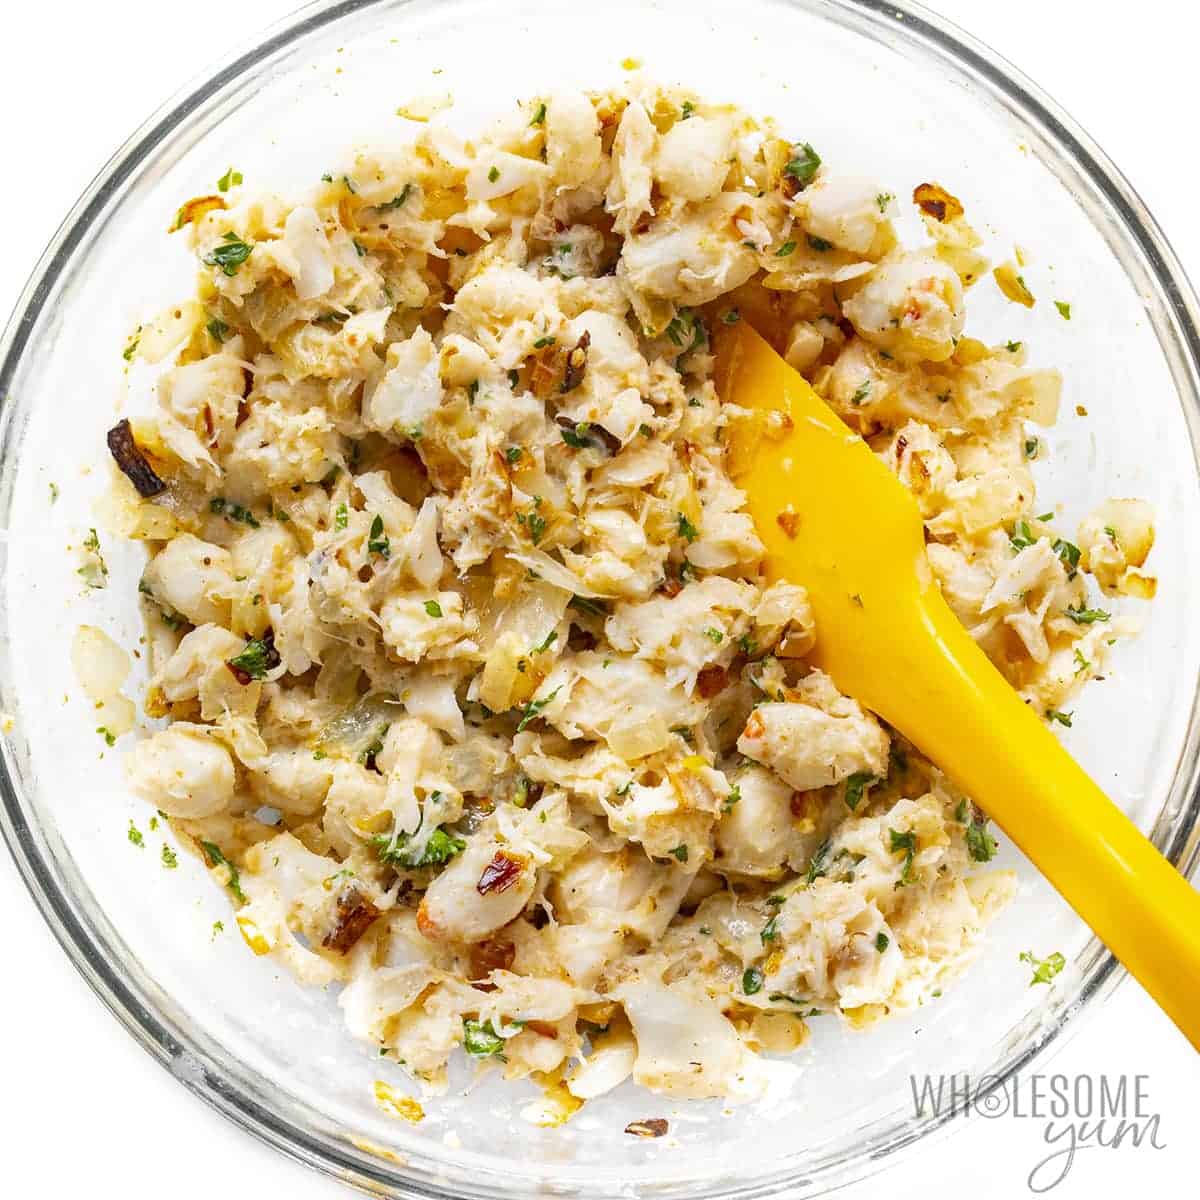 Crab stuffing for fish in a bowl.